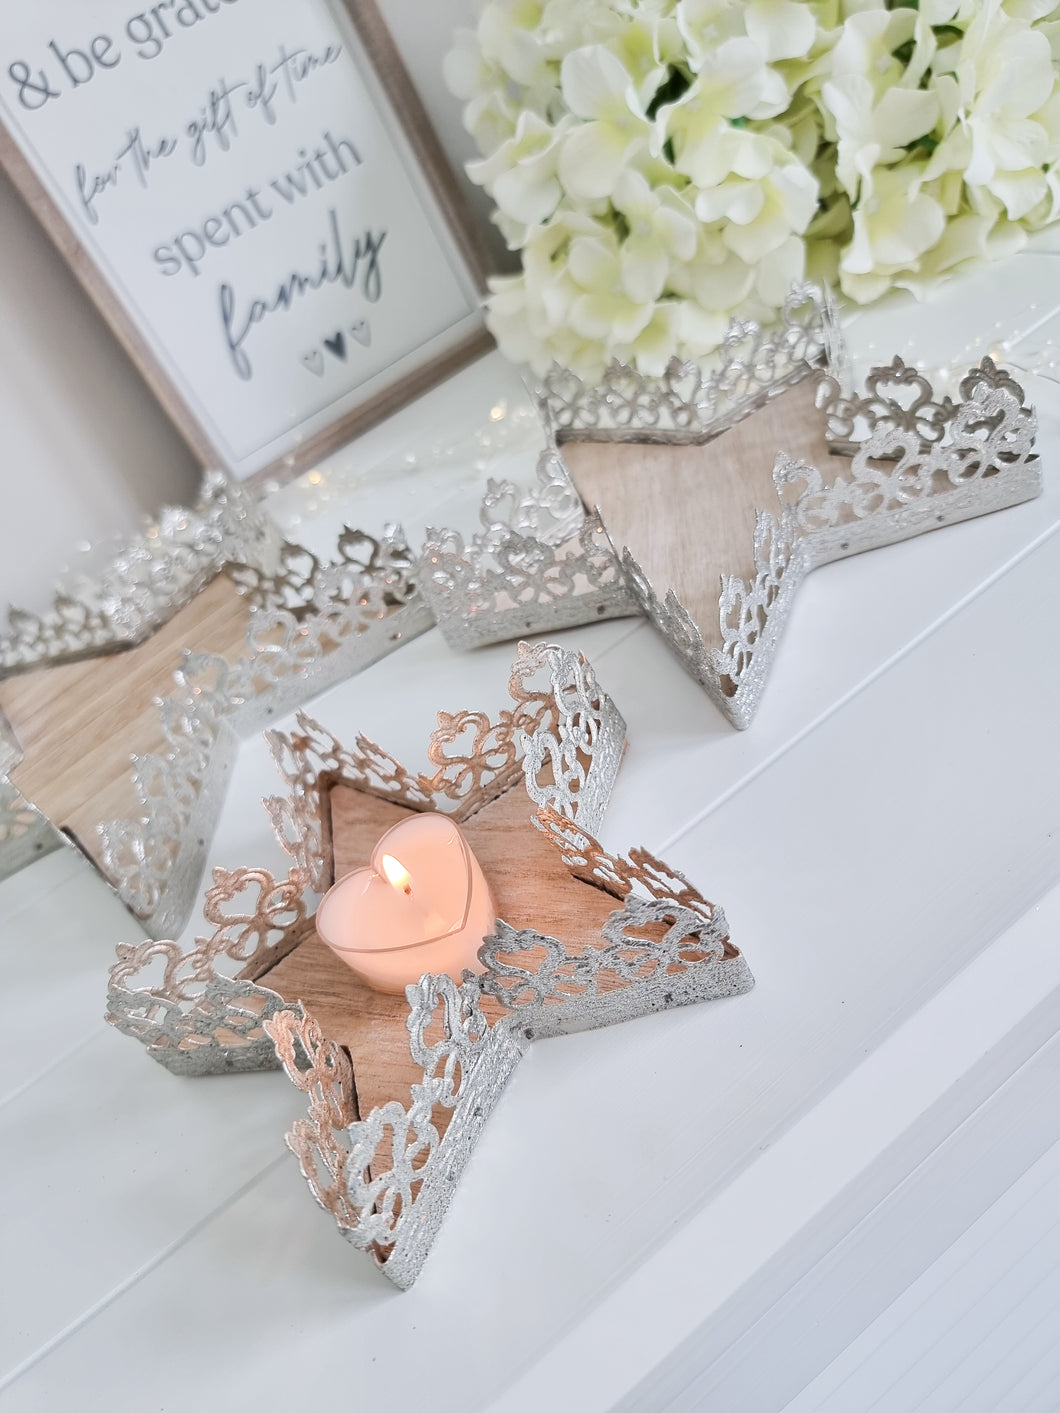 Silver Metal Star Tray With Wooden Base